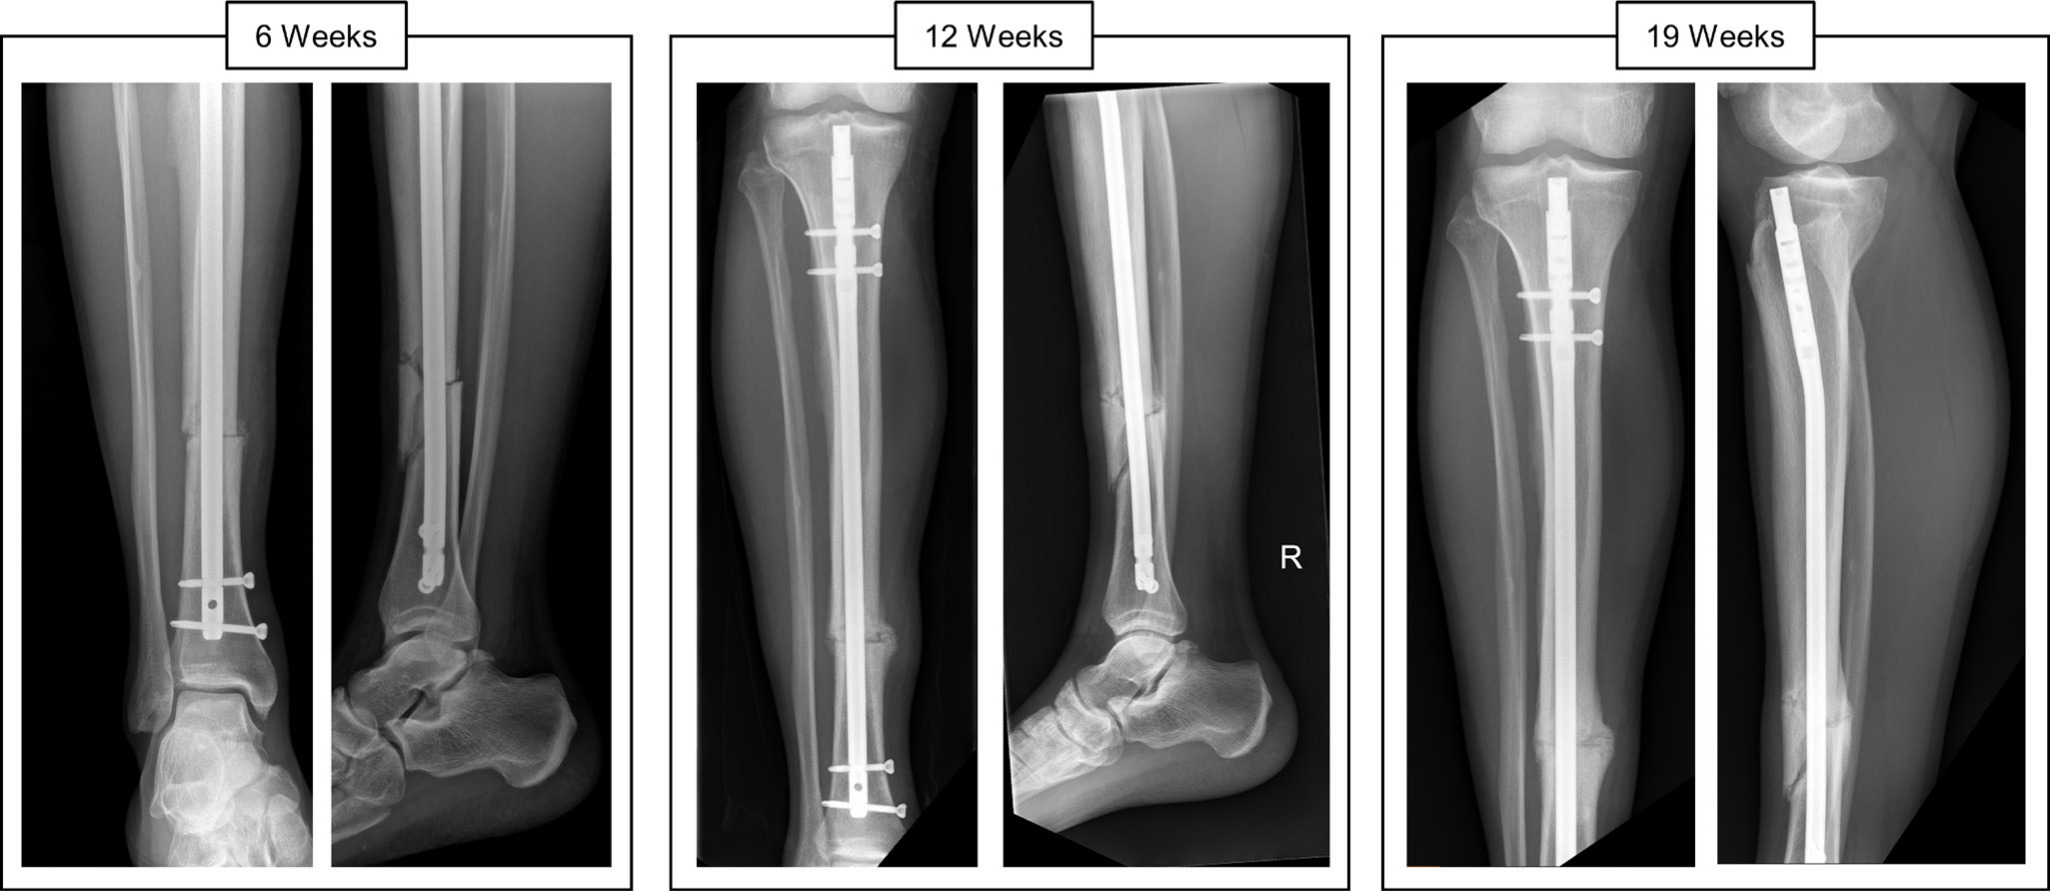 Fig. 3 
          Case example of a micromotion patient with anteroposterior and lateral radiographs shown at six, 12, and 19 weeks. This 25-year-old male with a sports-related closed fracture (closed, OTA/AO 42-B3) reported full return to activity with no pain at 12 weeks.
        